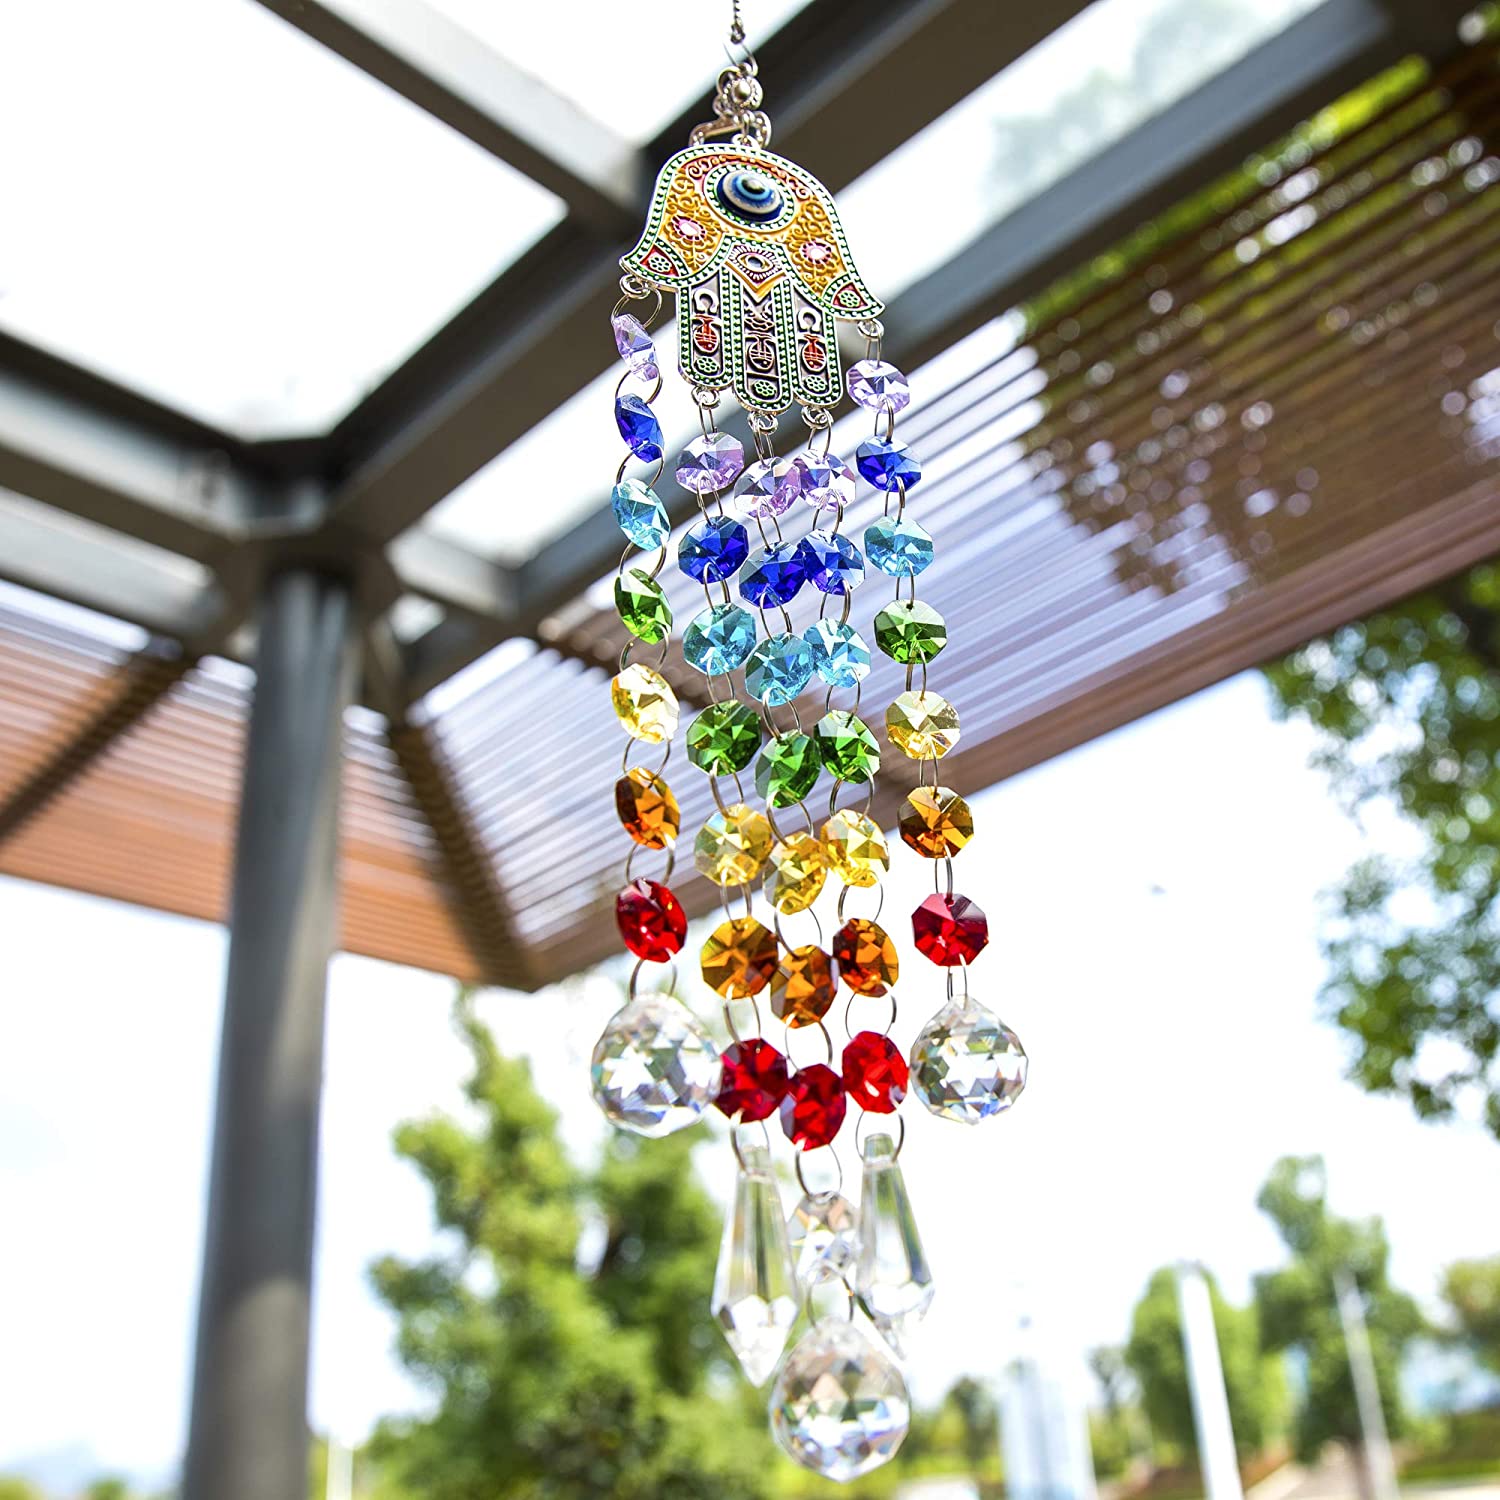 Hamsa Hand Hanging Crystal Suncatcher Ornament with Chakra Energy Beads and Clear Crystal Ball Prisms Rainbow Maker Pendant